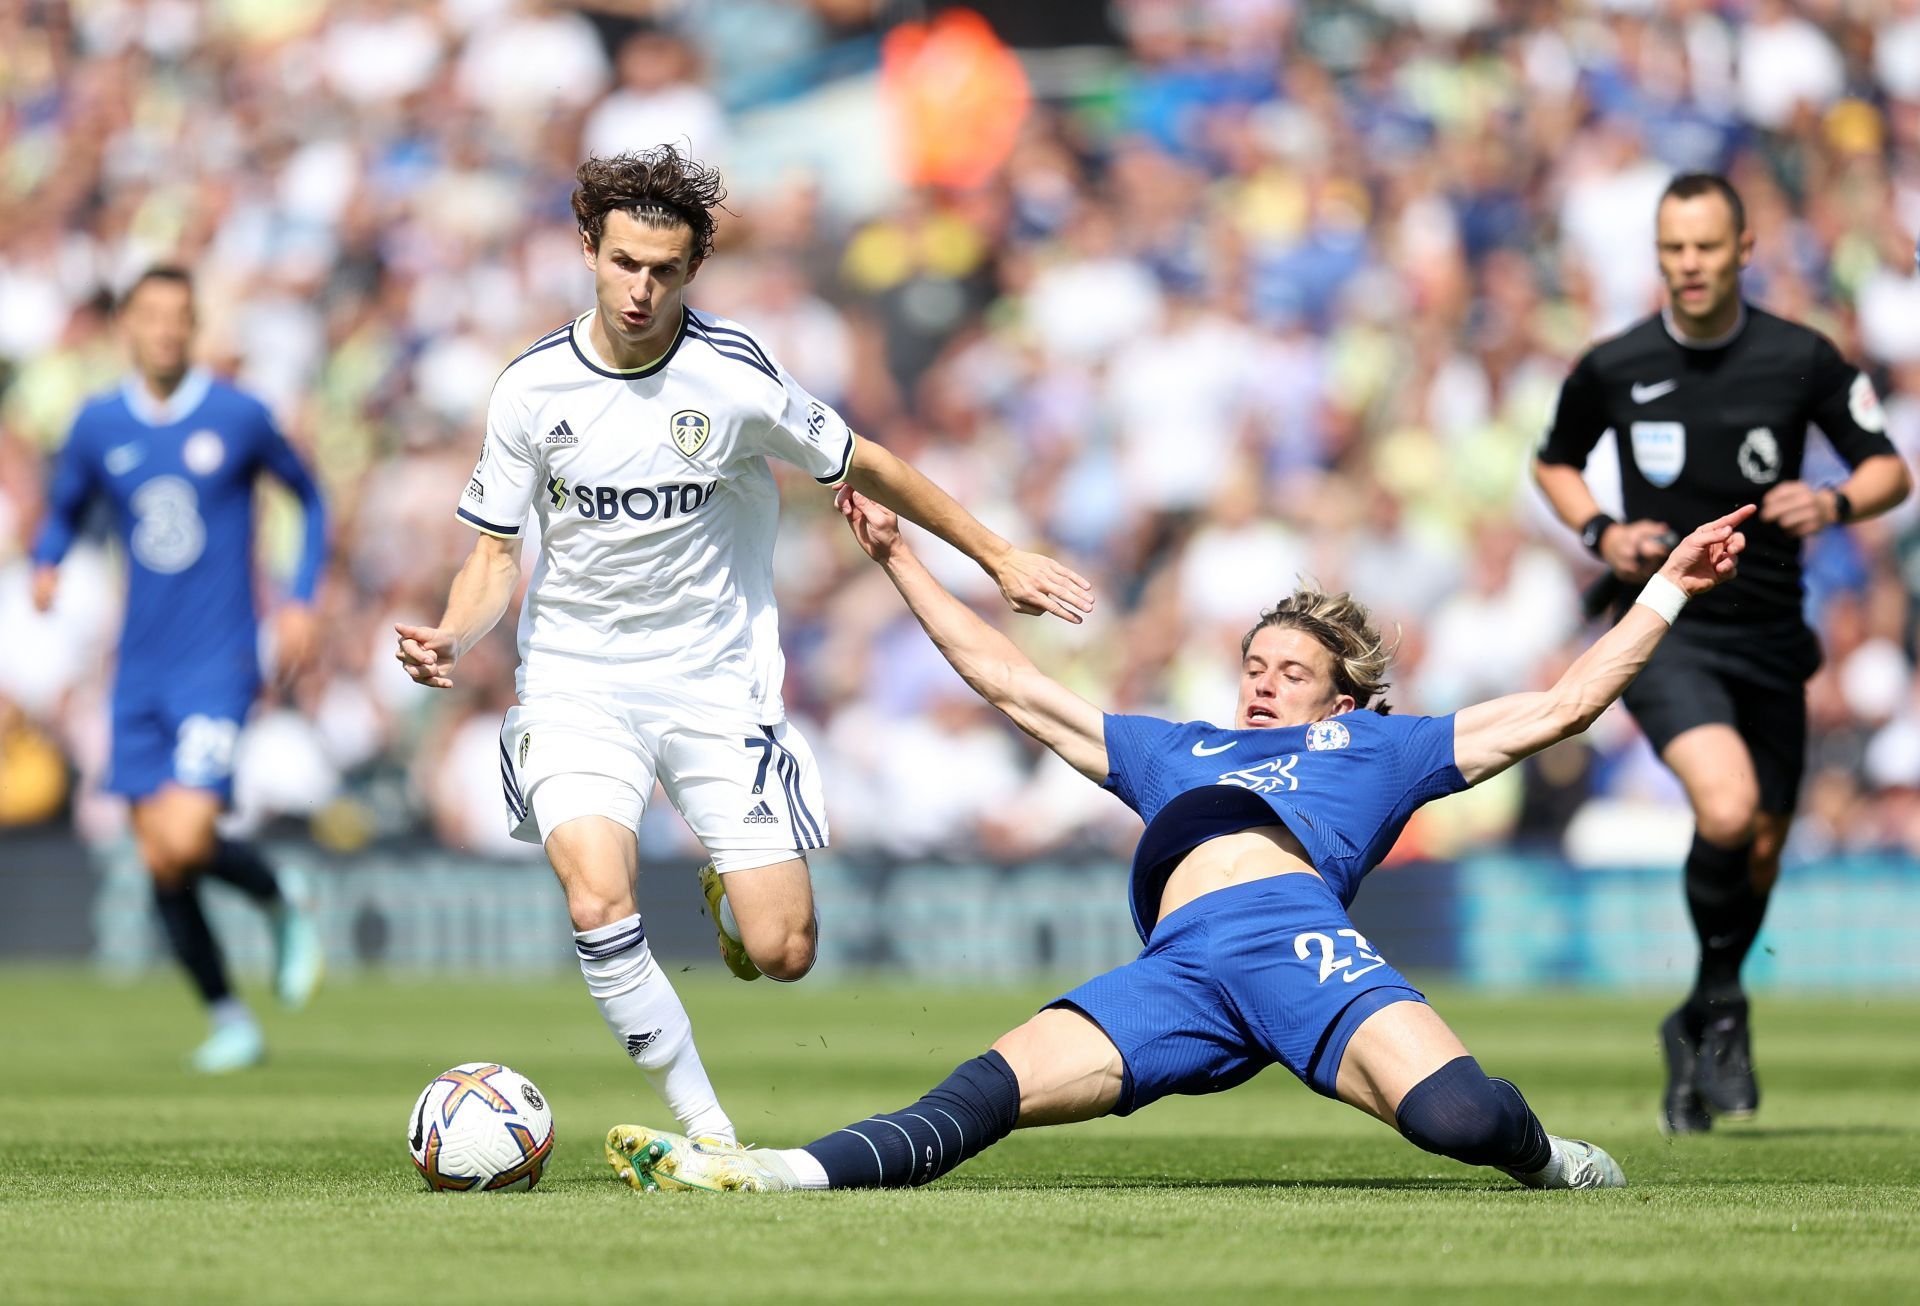 Leeds United registered their first Premier League win against Chelsea FC since 2002.